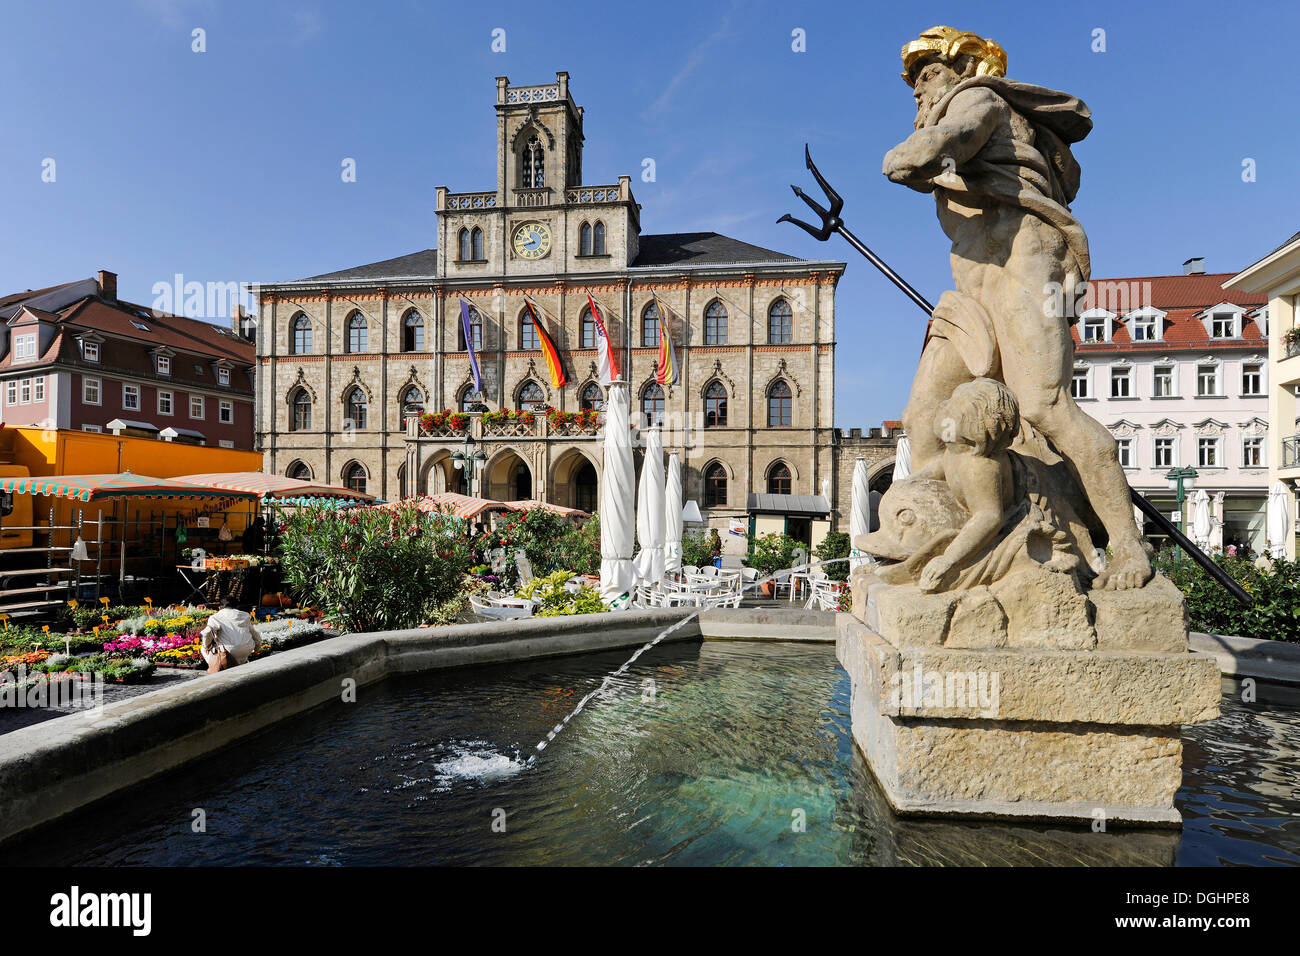 Marktplatz square with a fountain and the Town Hall, Weimar, Thuringia, Germany Stock Photo